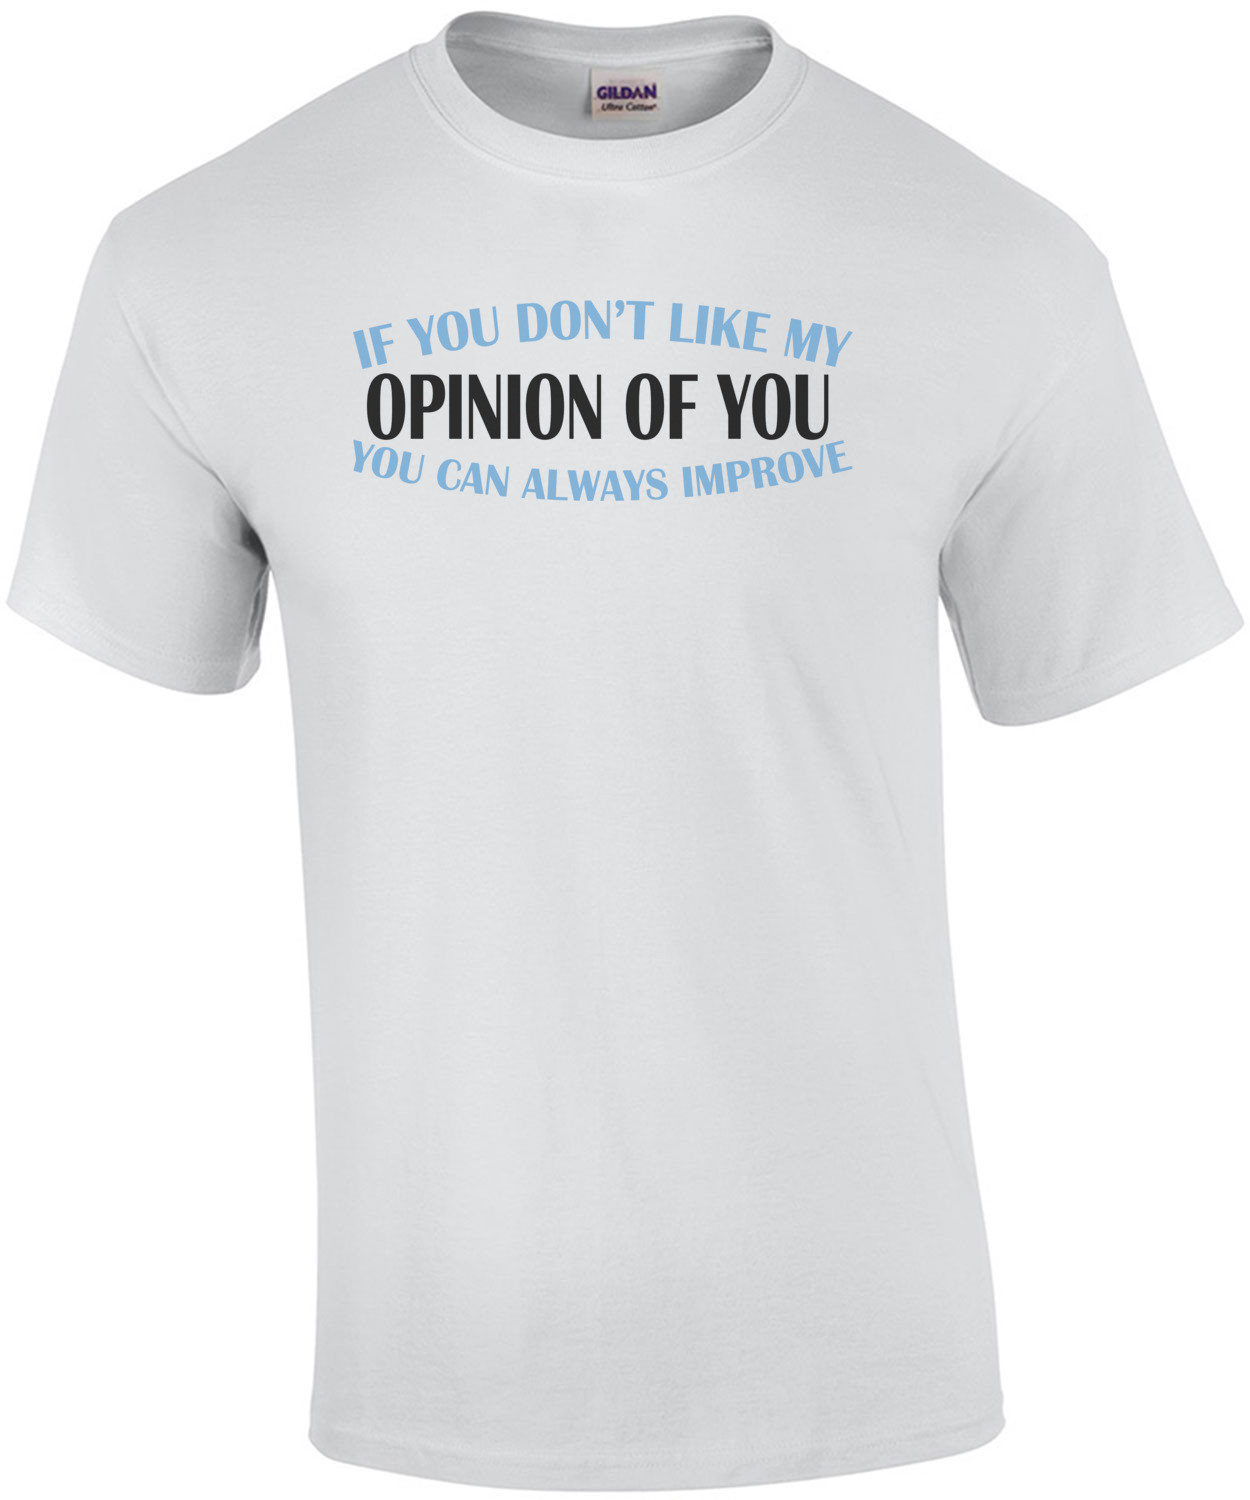 If you don't like my opinion of you. You can always improve. T-Shirt